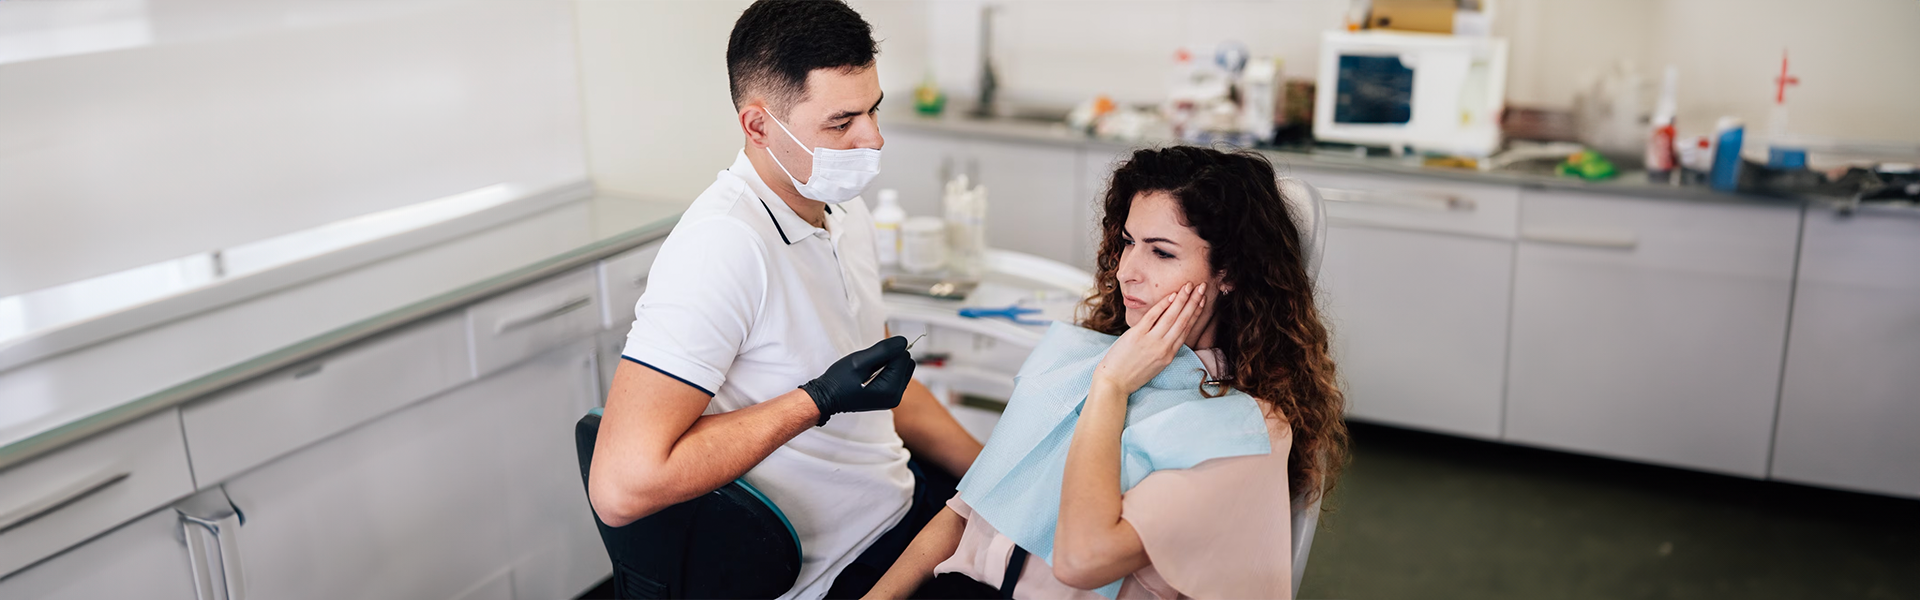 Emergency Dental: Swift Solutions When Your Smile Needs Urgent Care